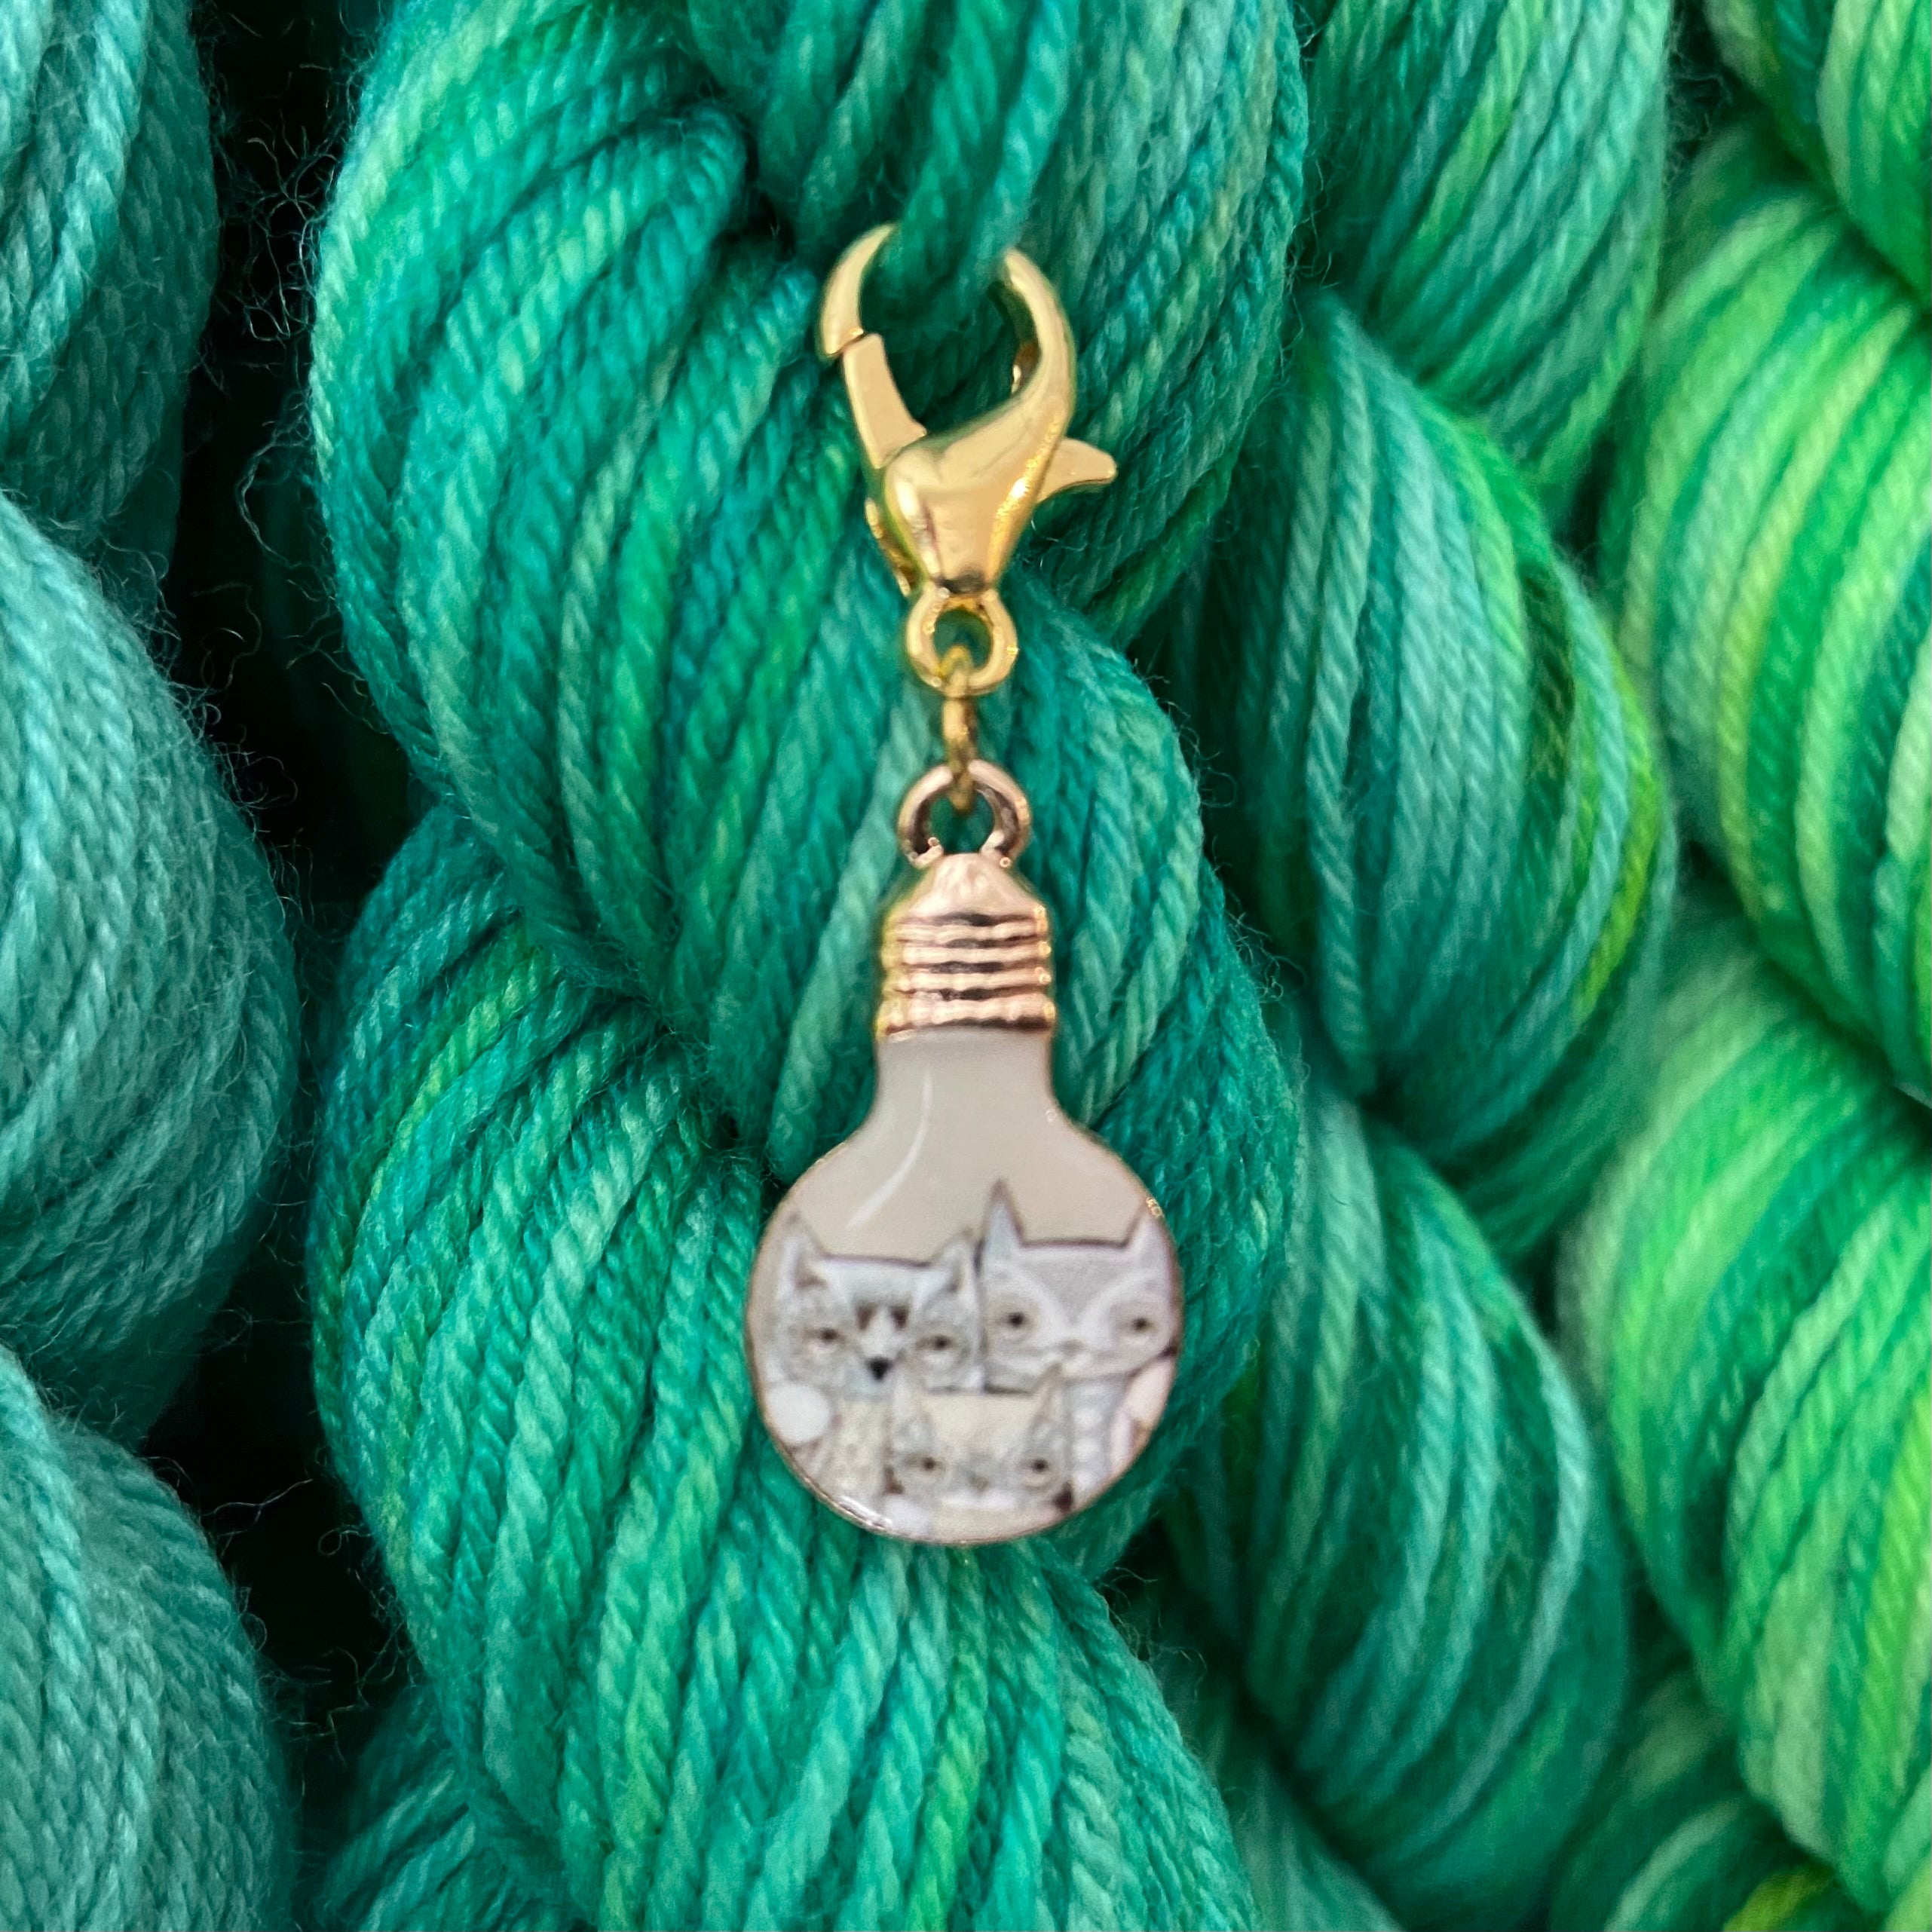 Cat Bulb Stitch Marker or Place Keeper